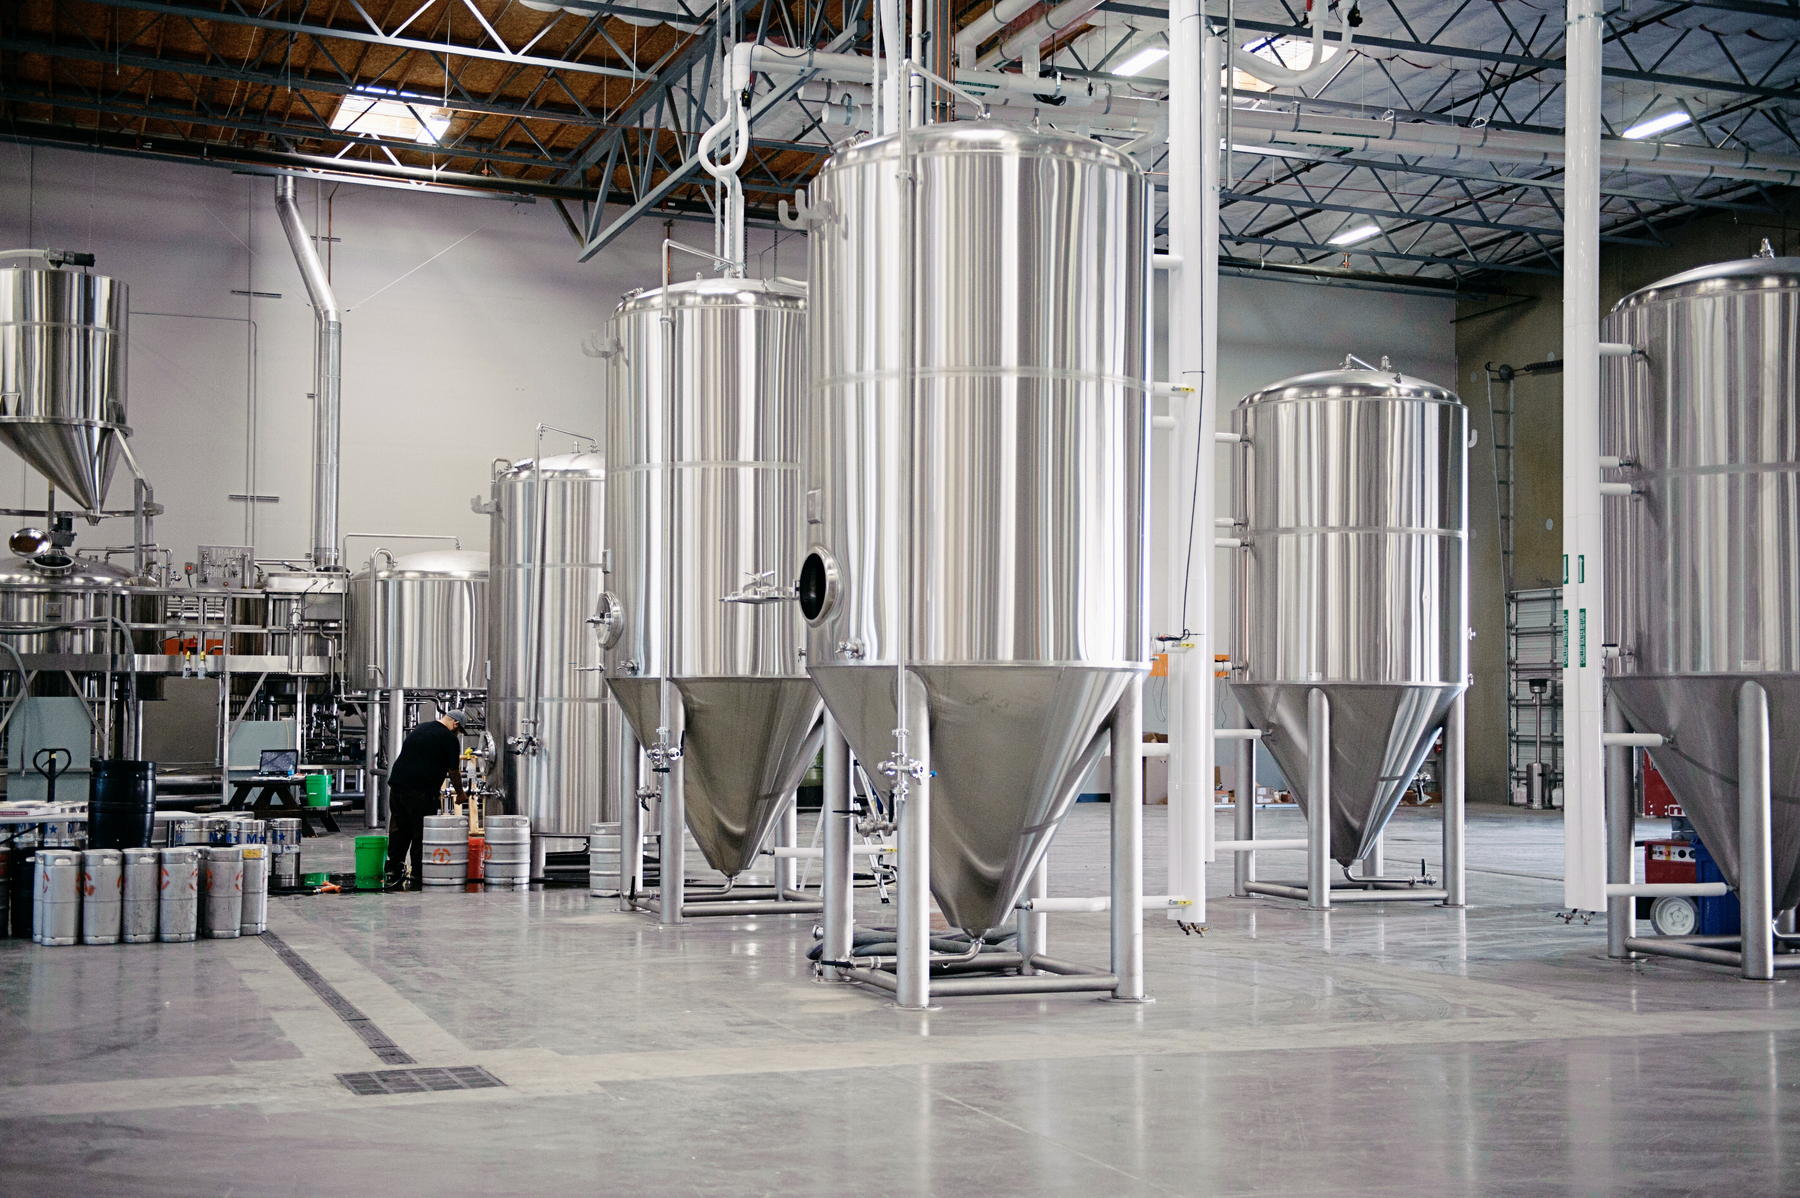 Join Us at the CCBA Spring Conference for Workshops on Technical Brewing